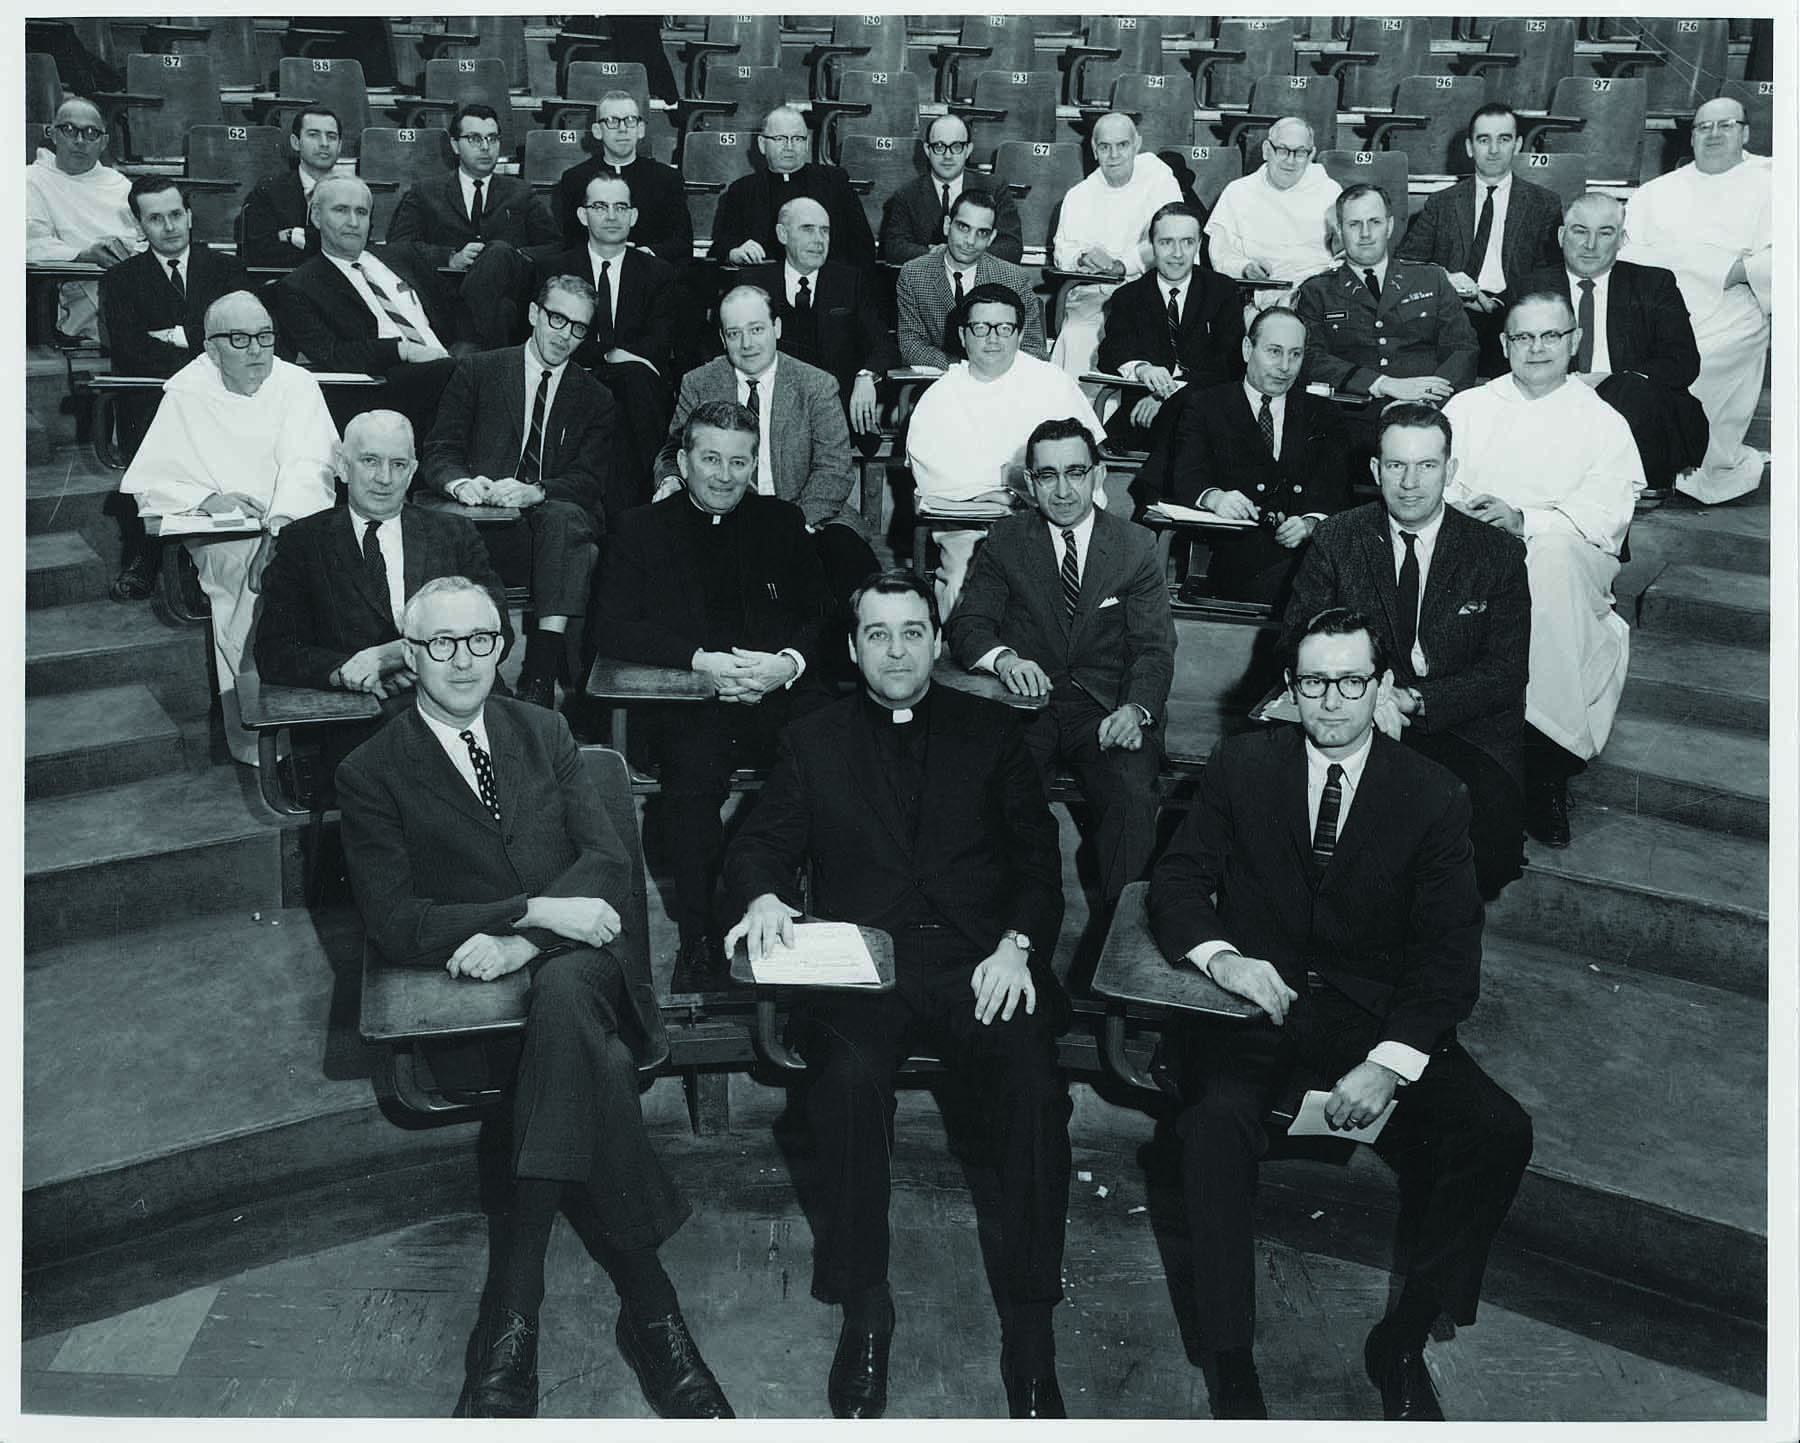 The all-male Faculty Senate convenes its first meeting on Jan. 31, 1968.